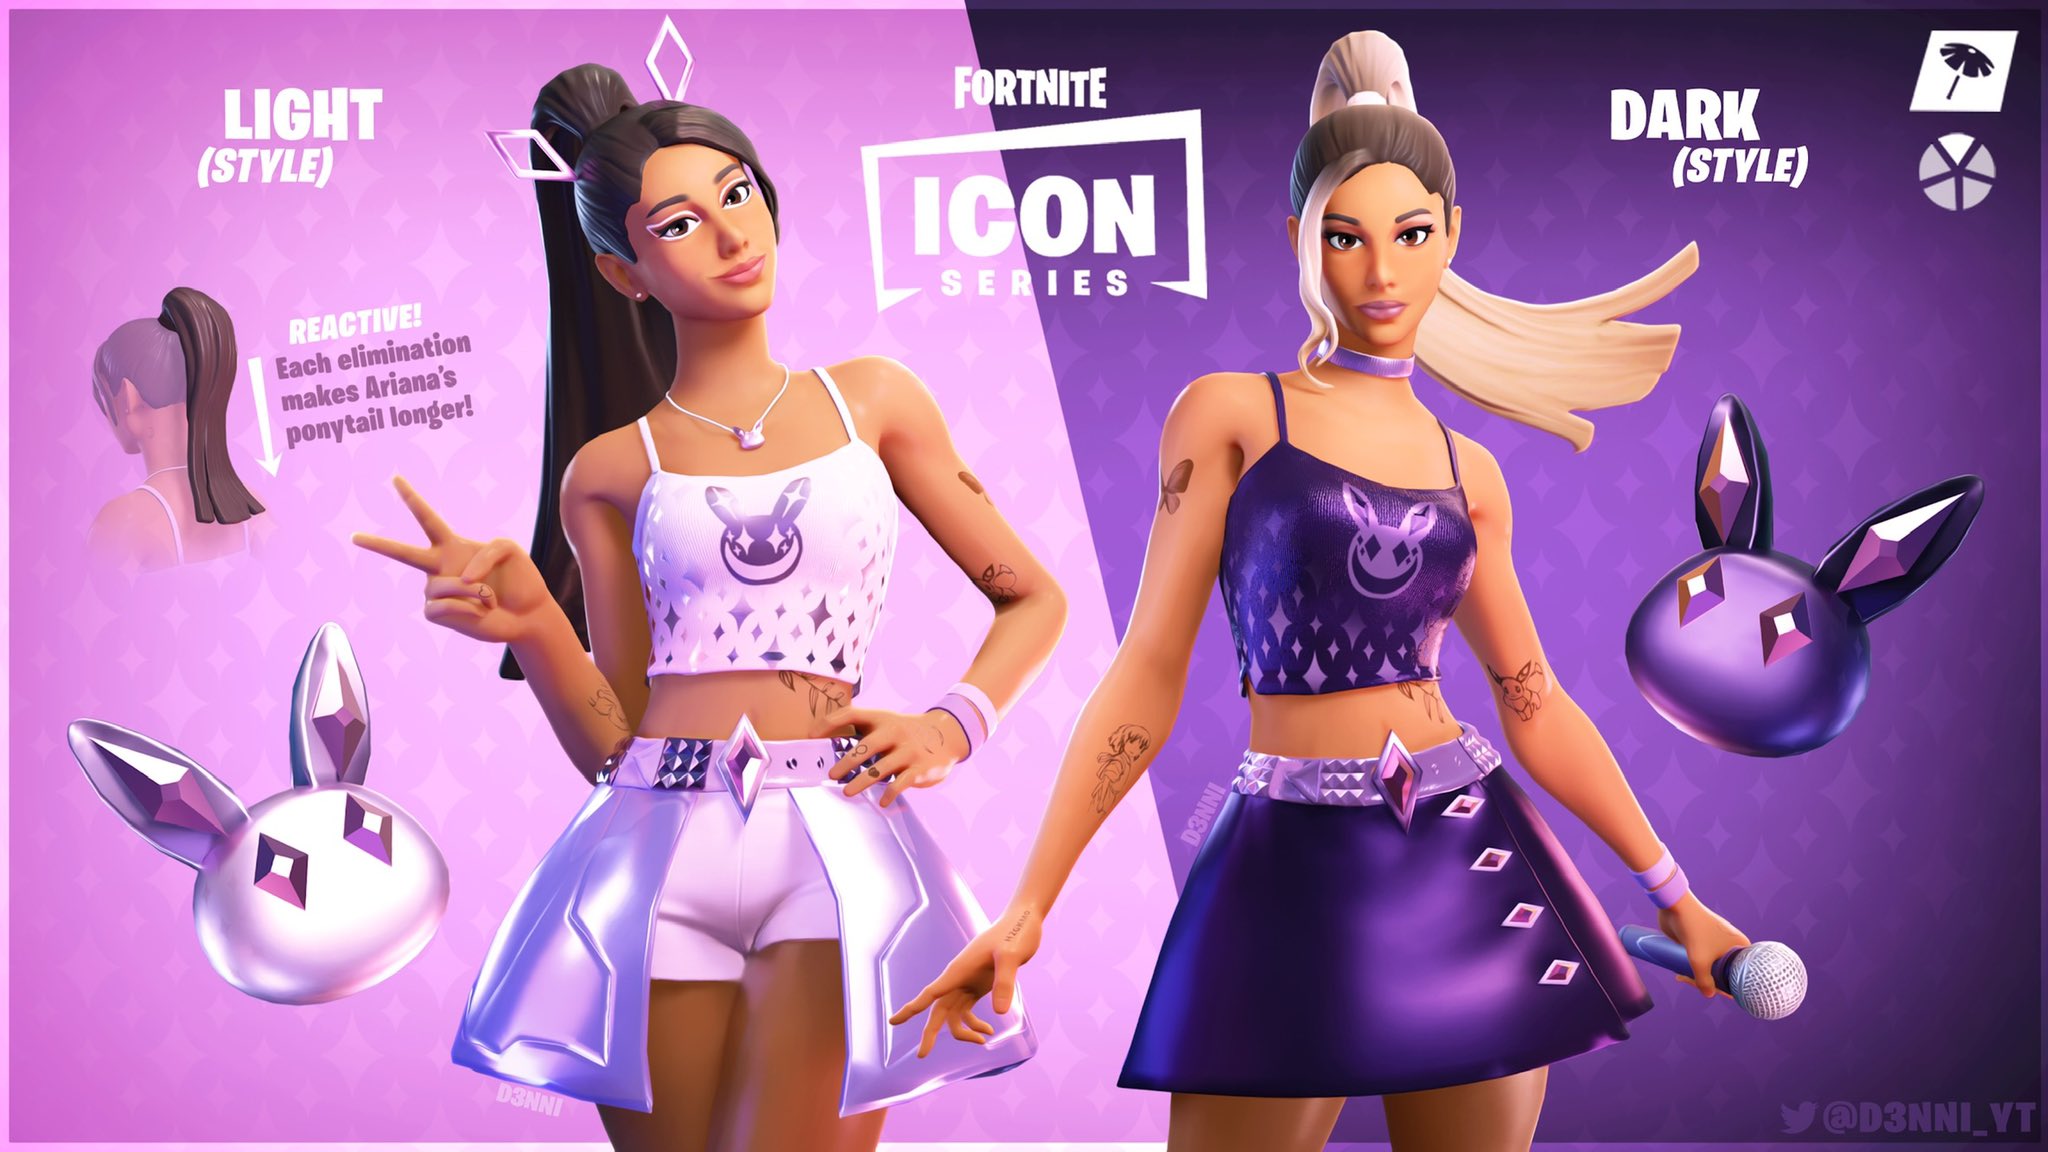 Fortnitefanaticfan On New Icon Series Skin Which Is